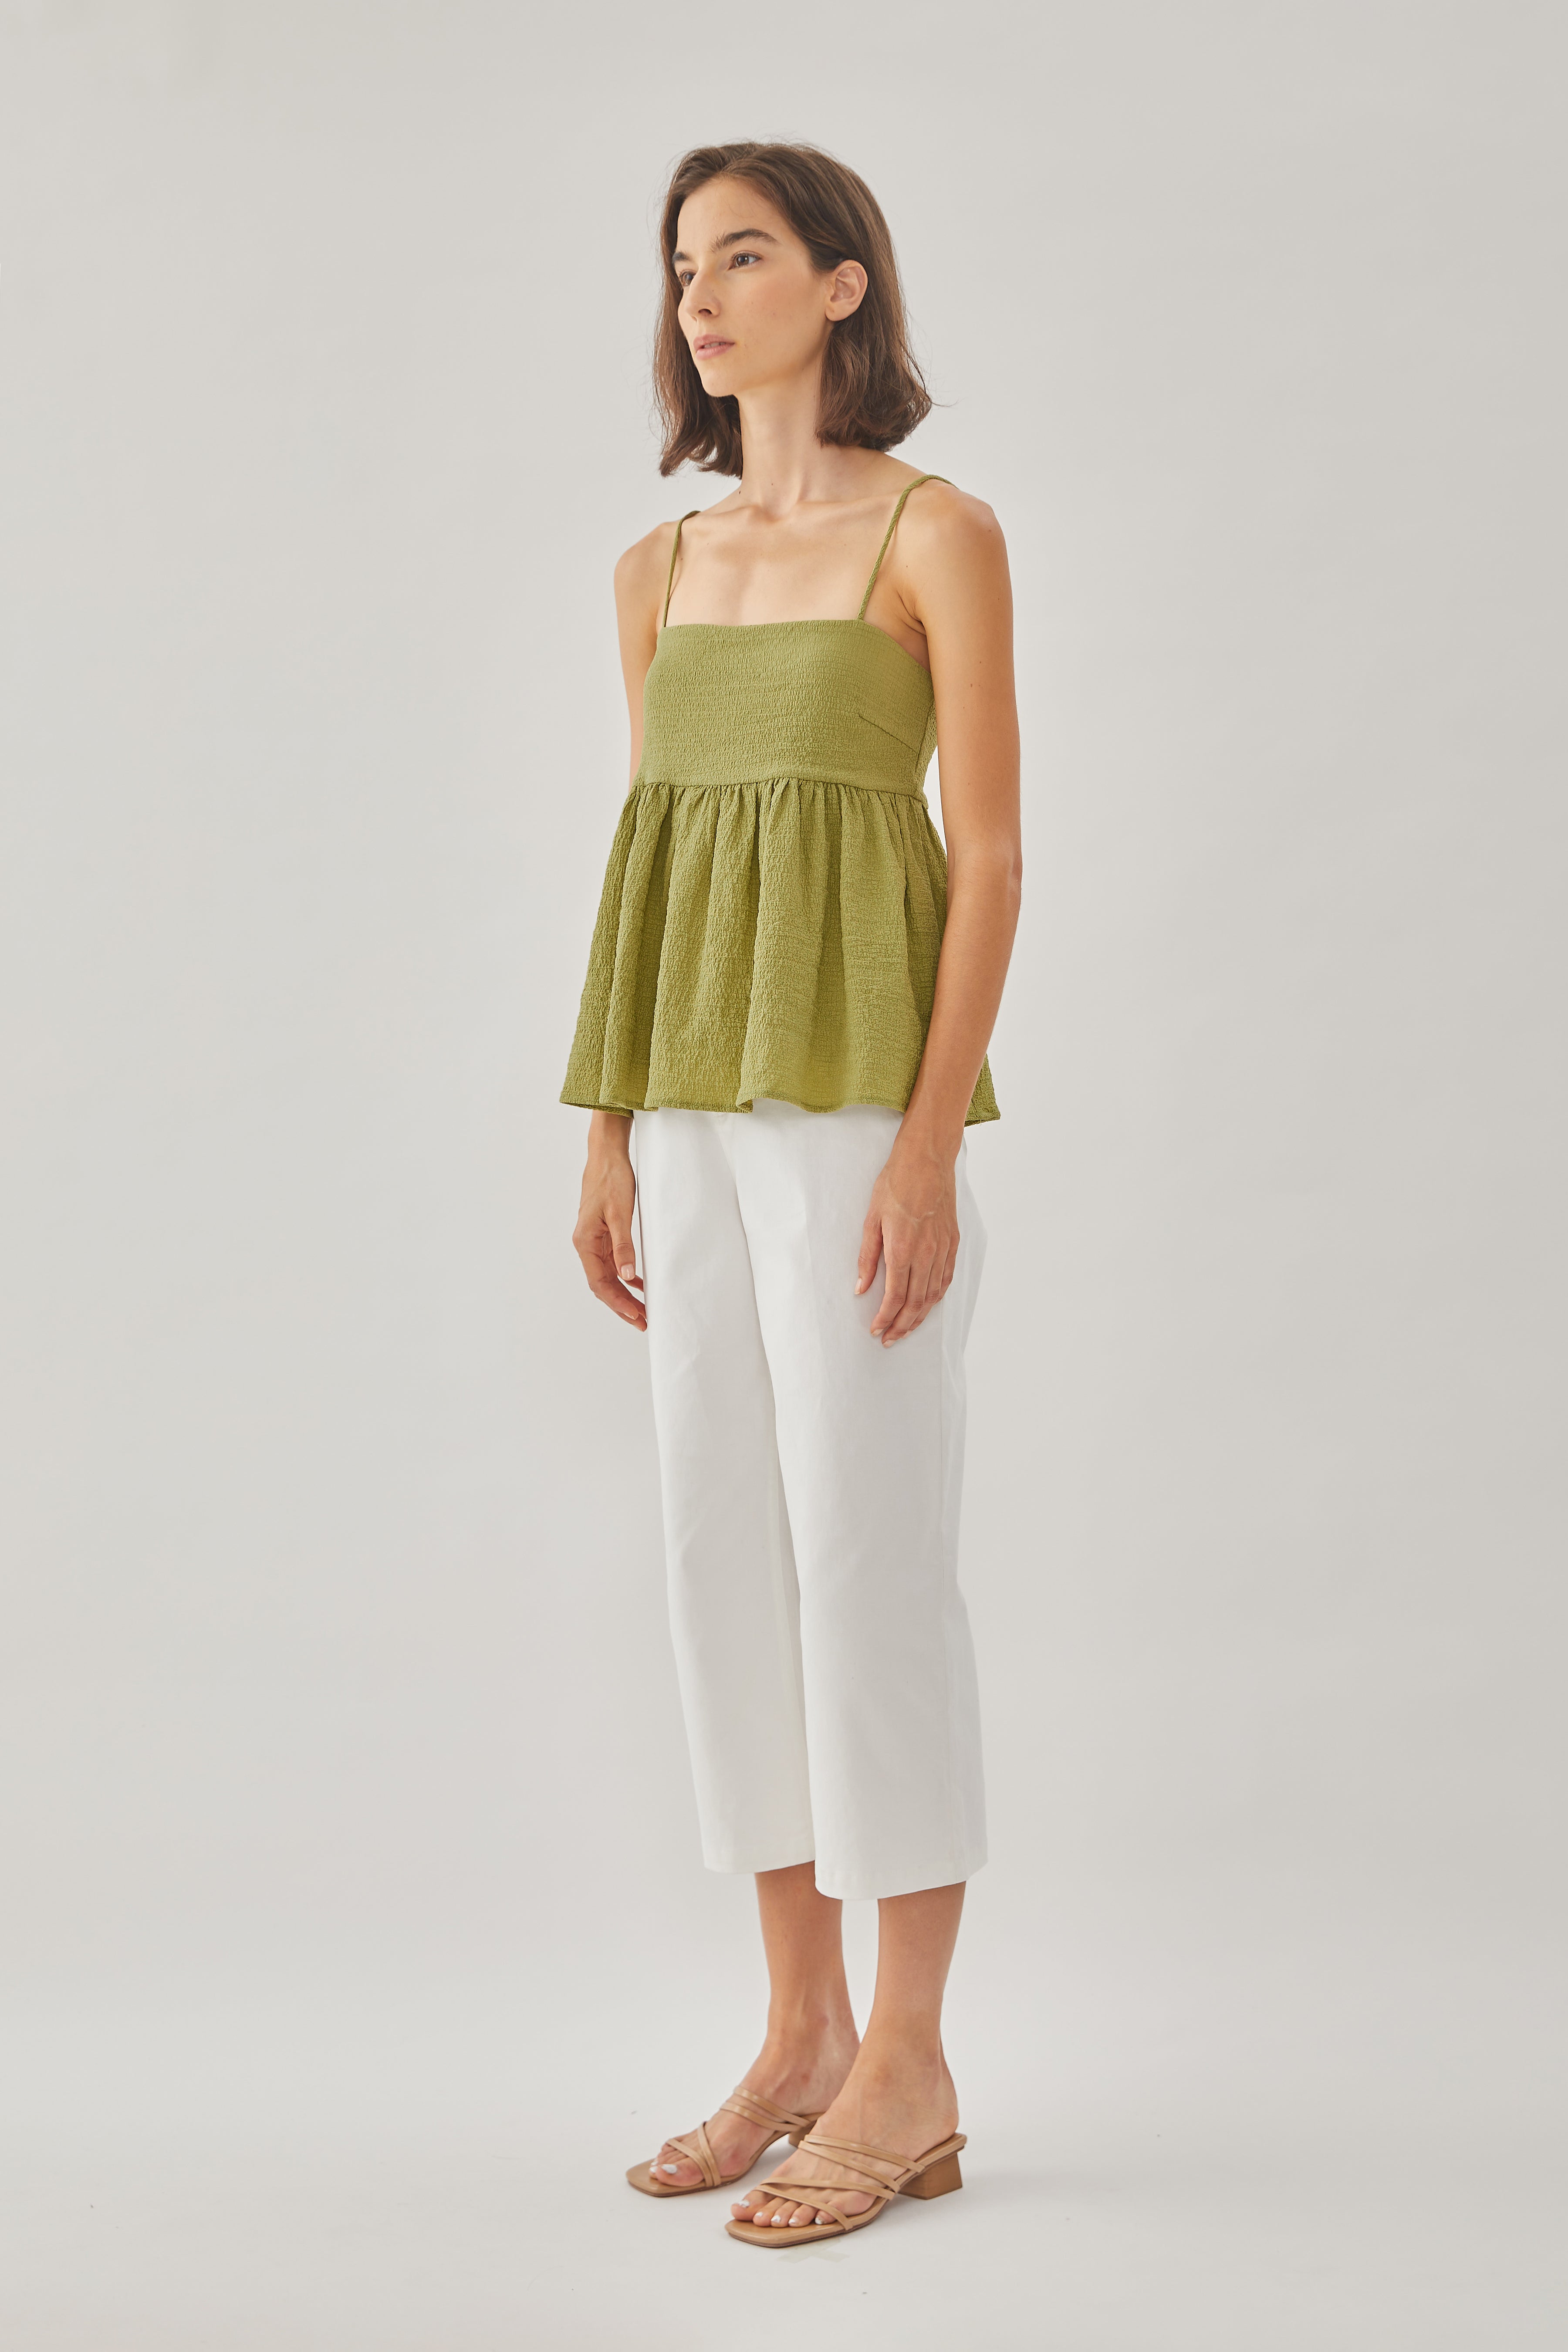 Textured Cami Top in Olive